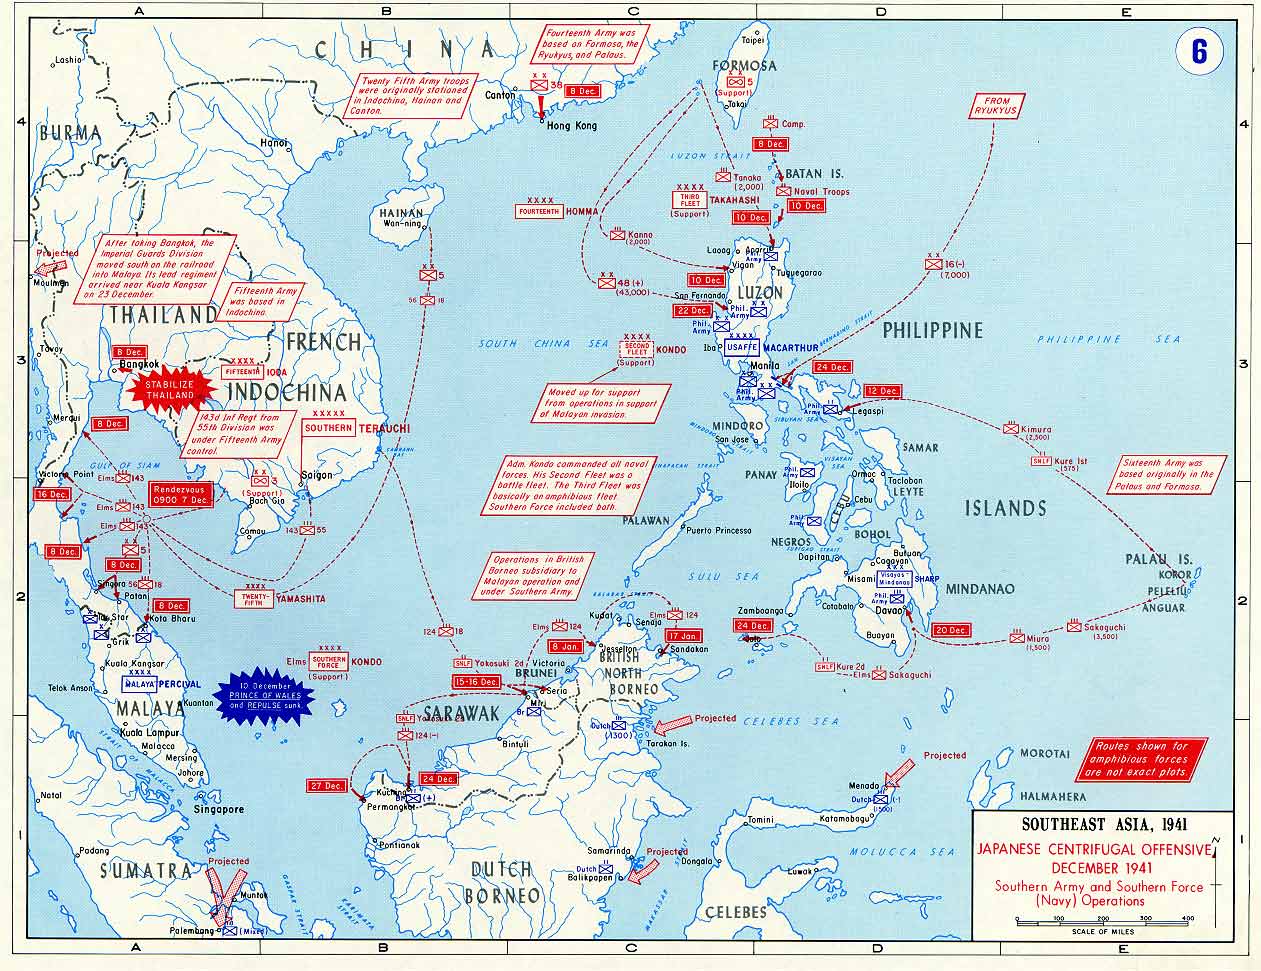 Map Showing Japanese Offensive December, 1941